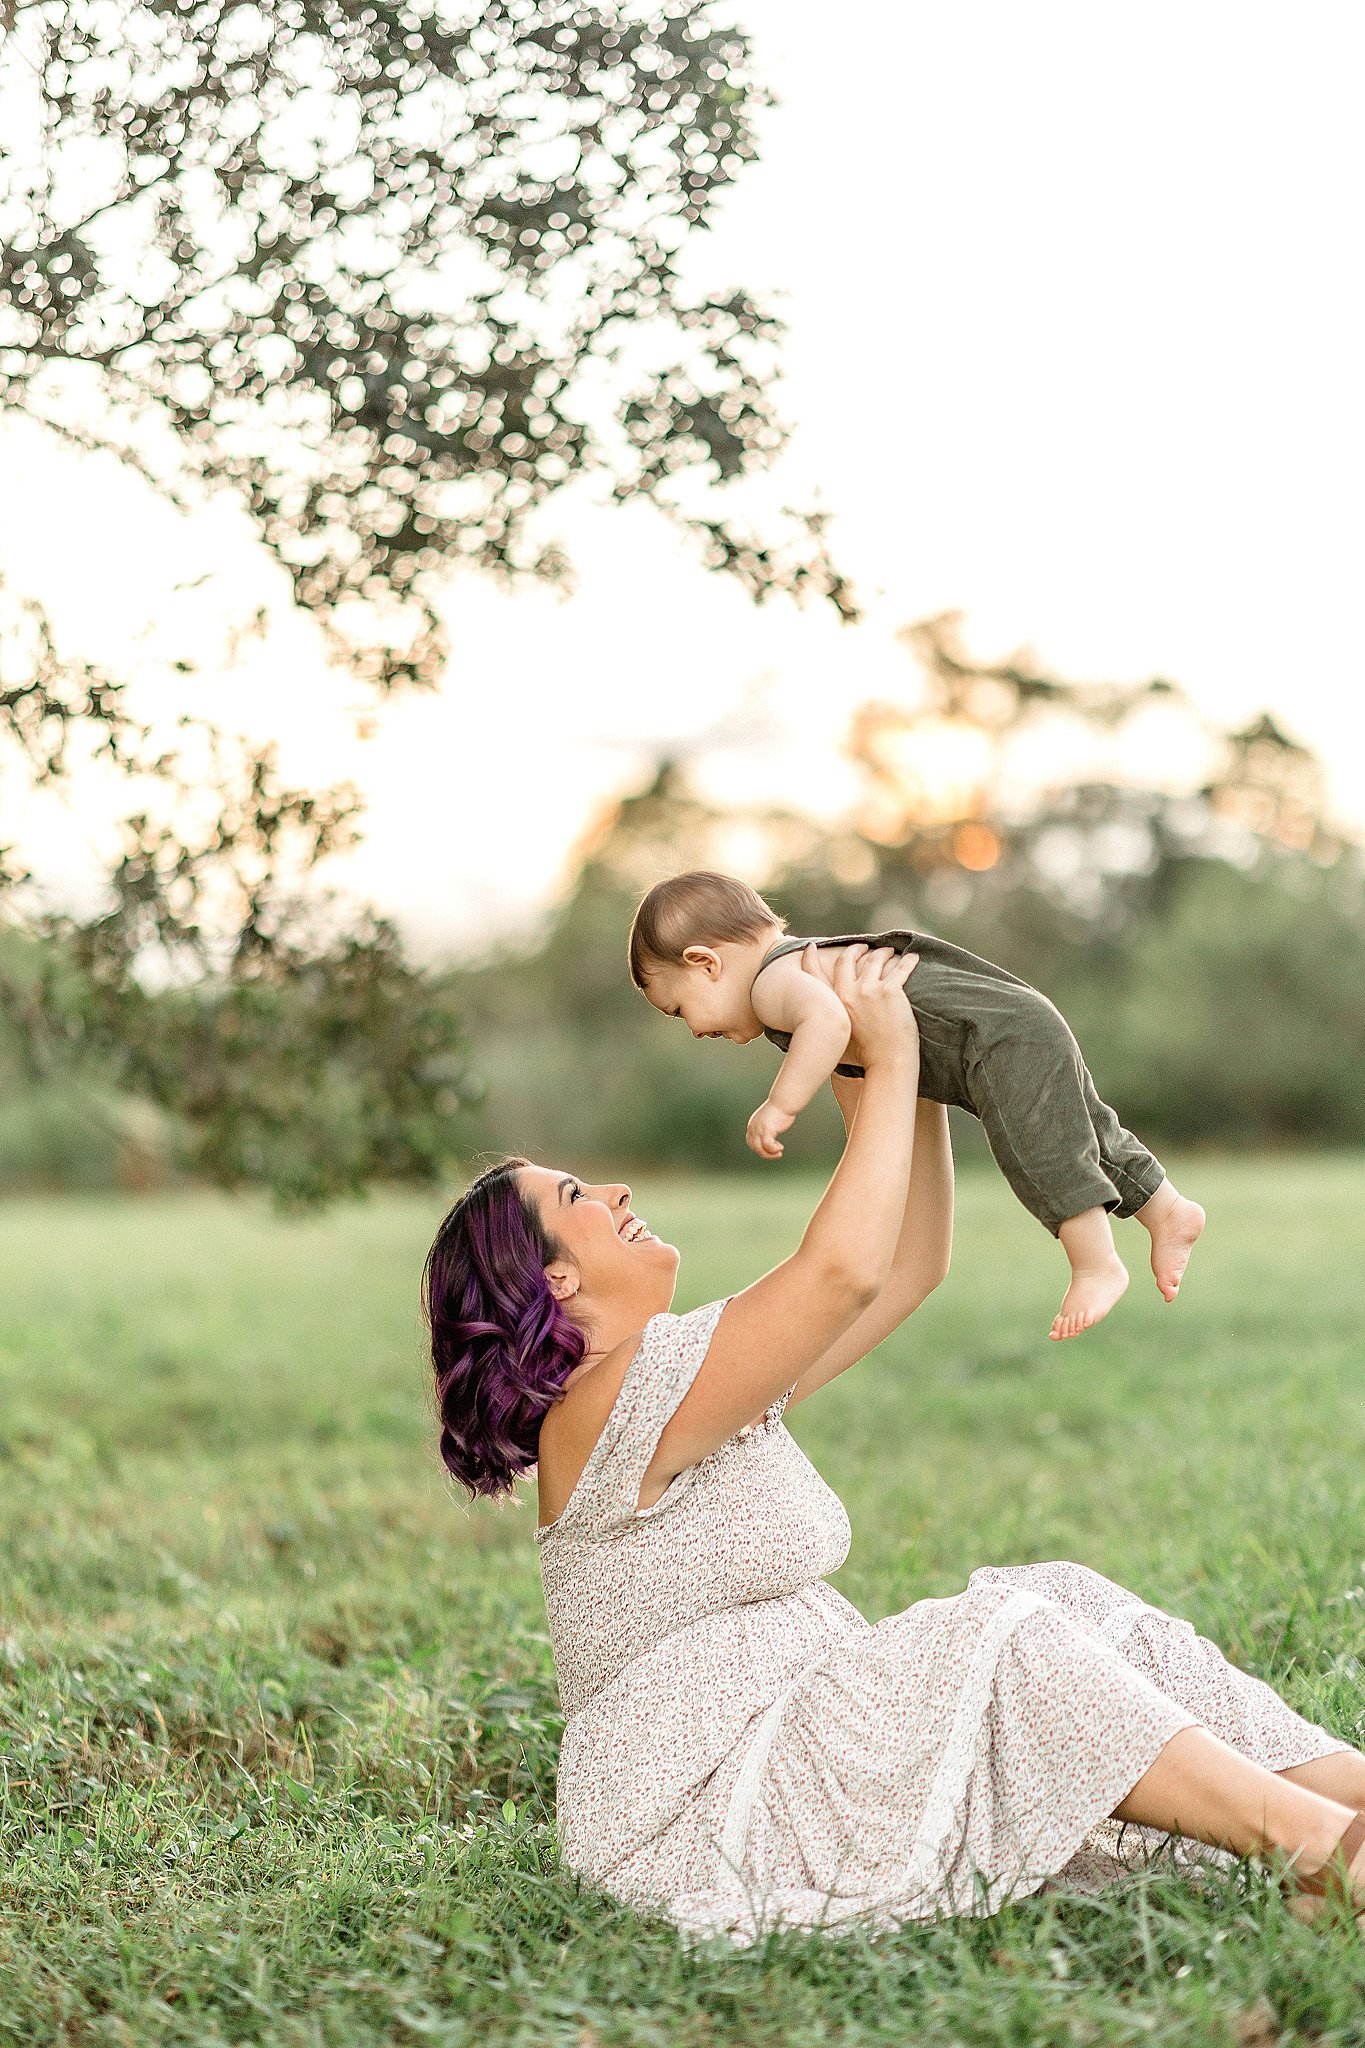 A mom in a white dress sits in the grass under a tree at sunset lifting and playing with her toddler son in green overalls after a day at a miami daycare